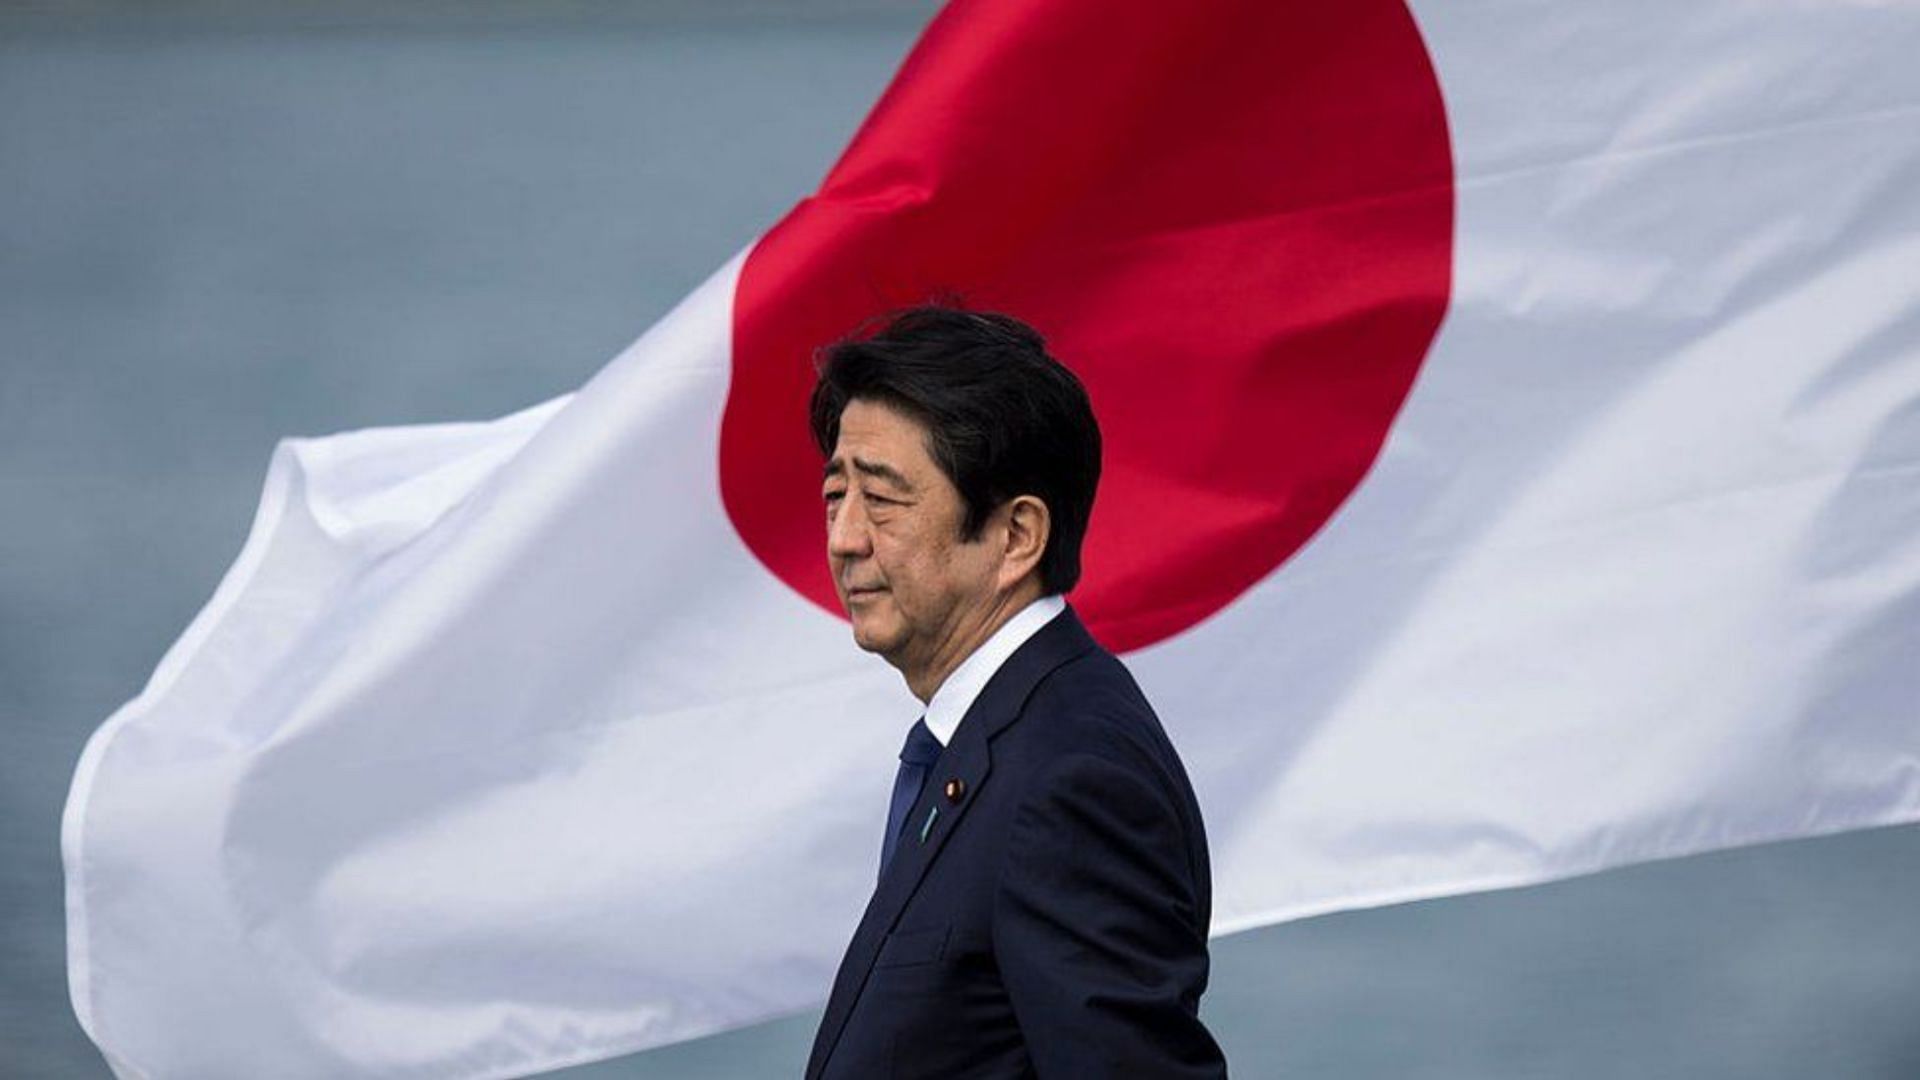 Former Prime Minister of Japan, Shinzo Abe was assassinated on Friday during a campaign in western Japan (Image via Getty Images)